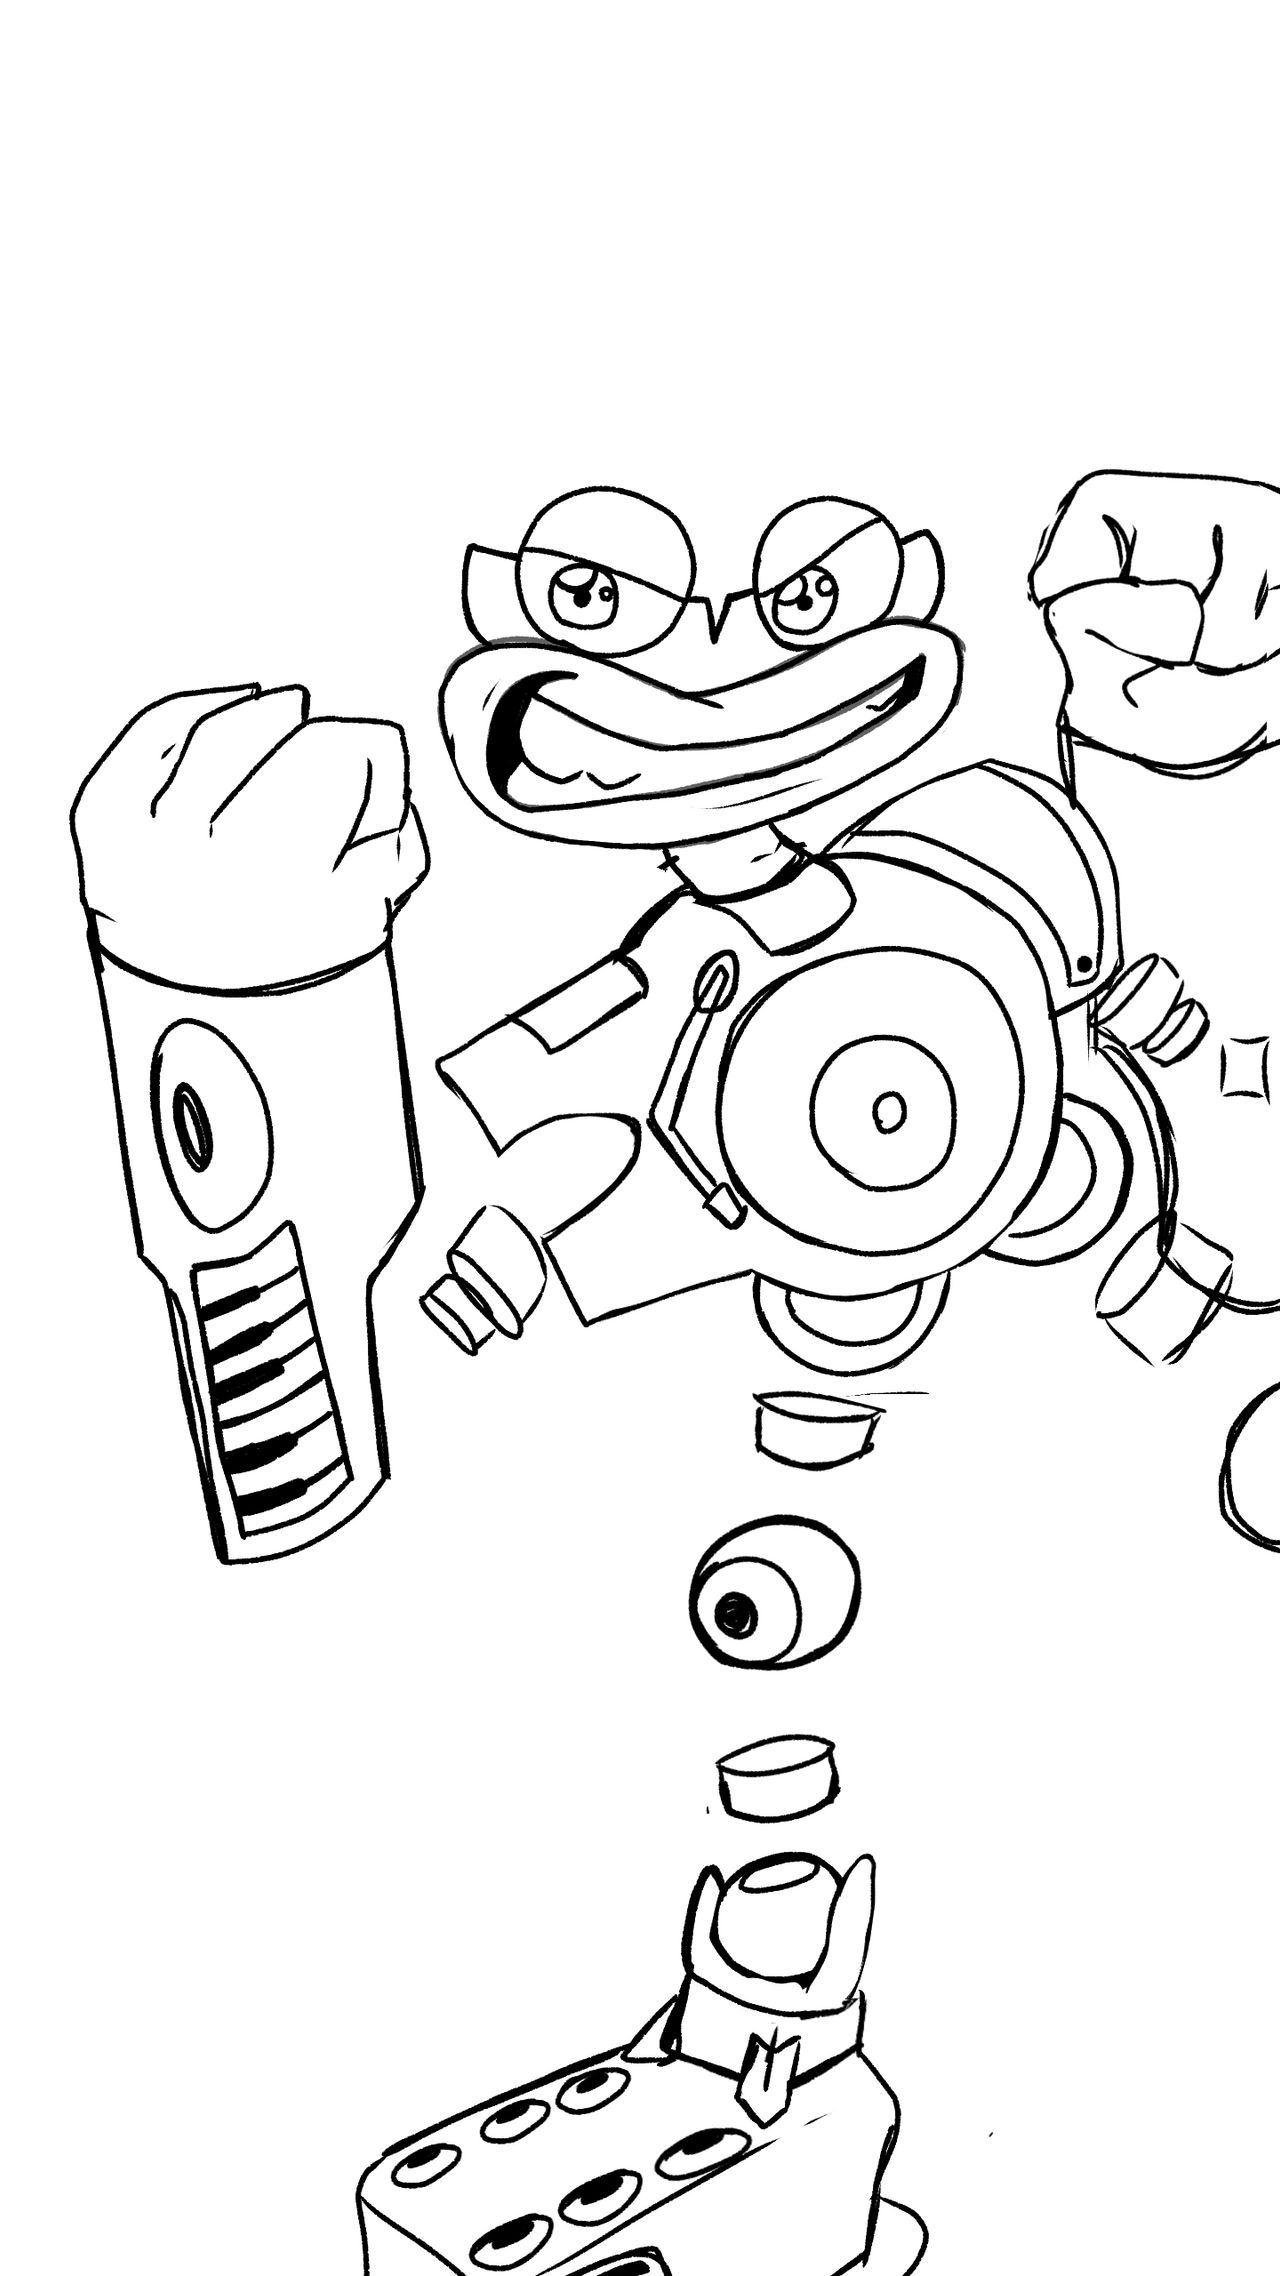 Explore the World of Wubbox with Engaging Coloring Pages